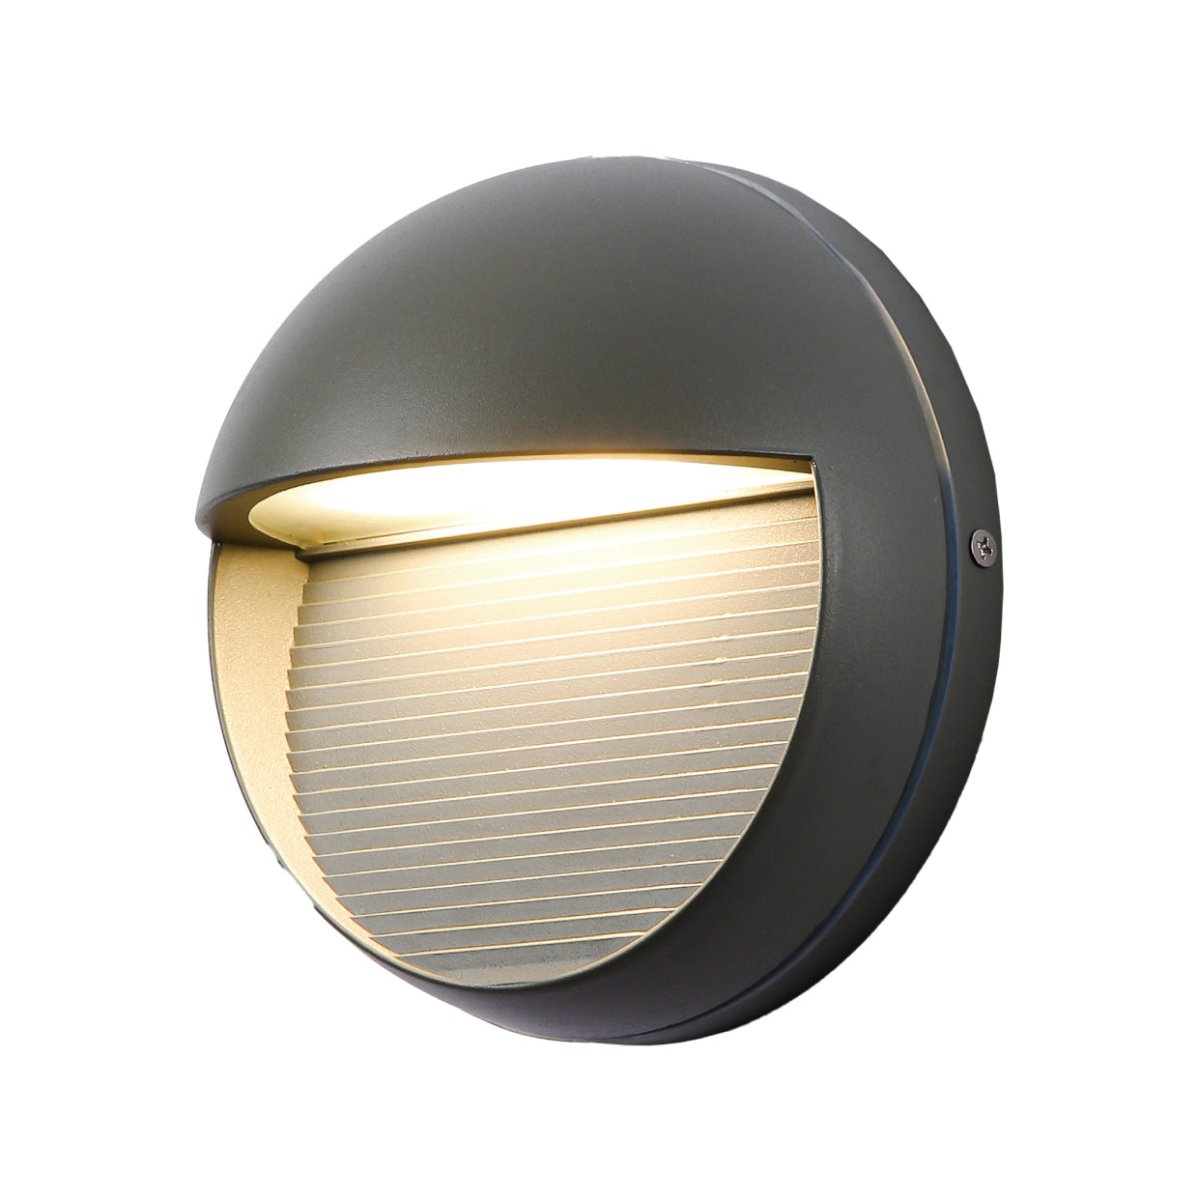 Main image of LED Diecast Aluminium Round Stair and Wall Light 5W Warm White 3000K IP54 Grey | TEKLED 182-03346 on version